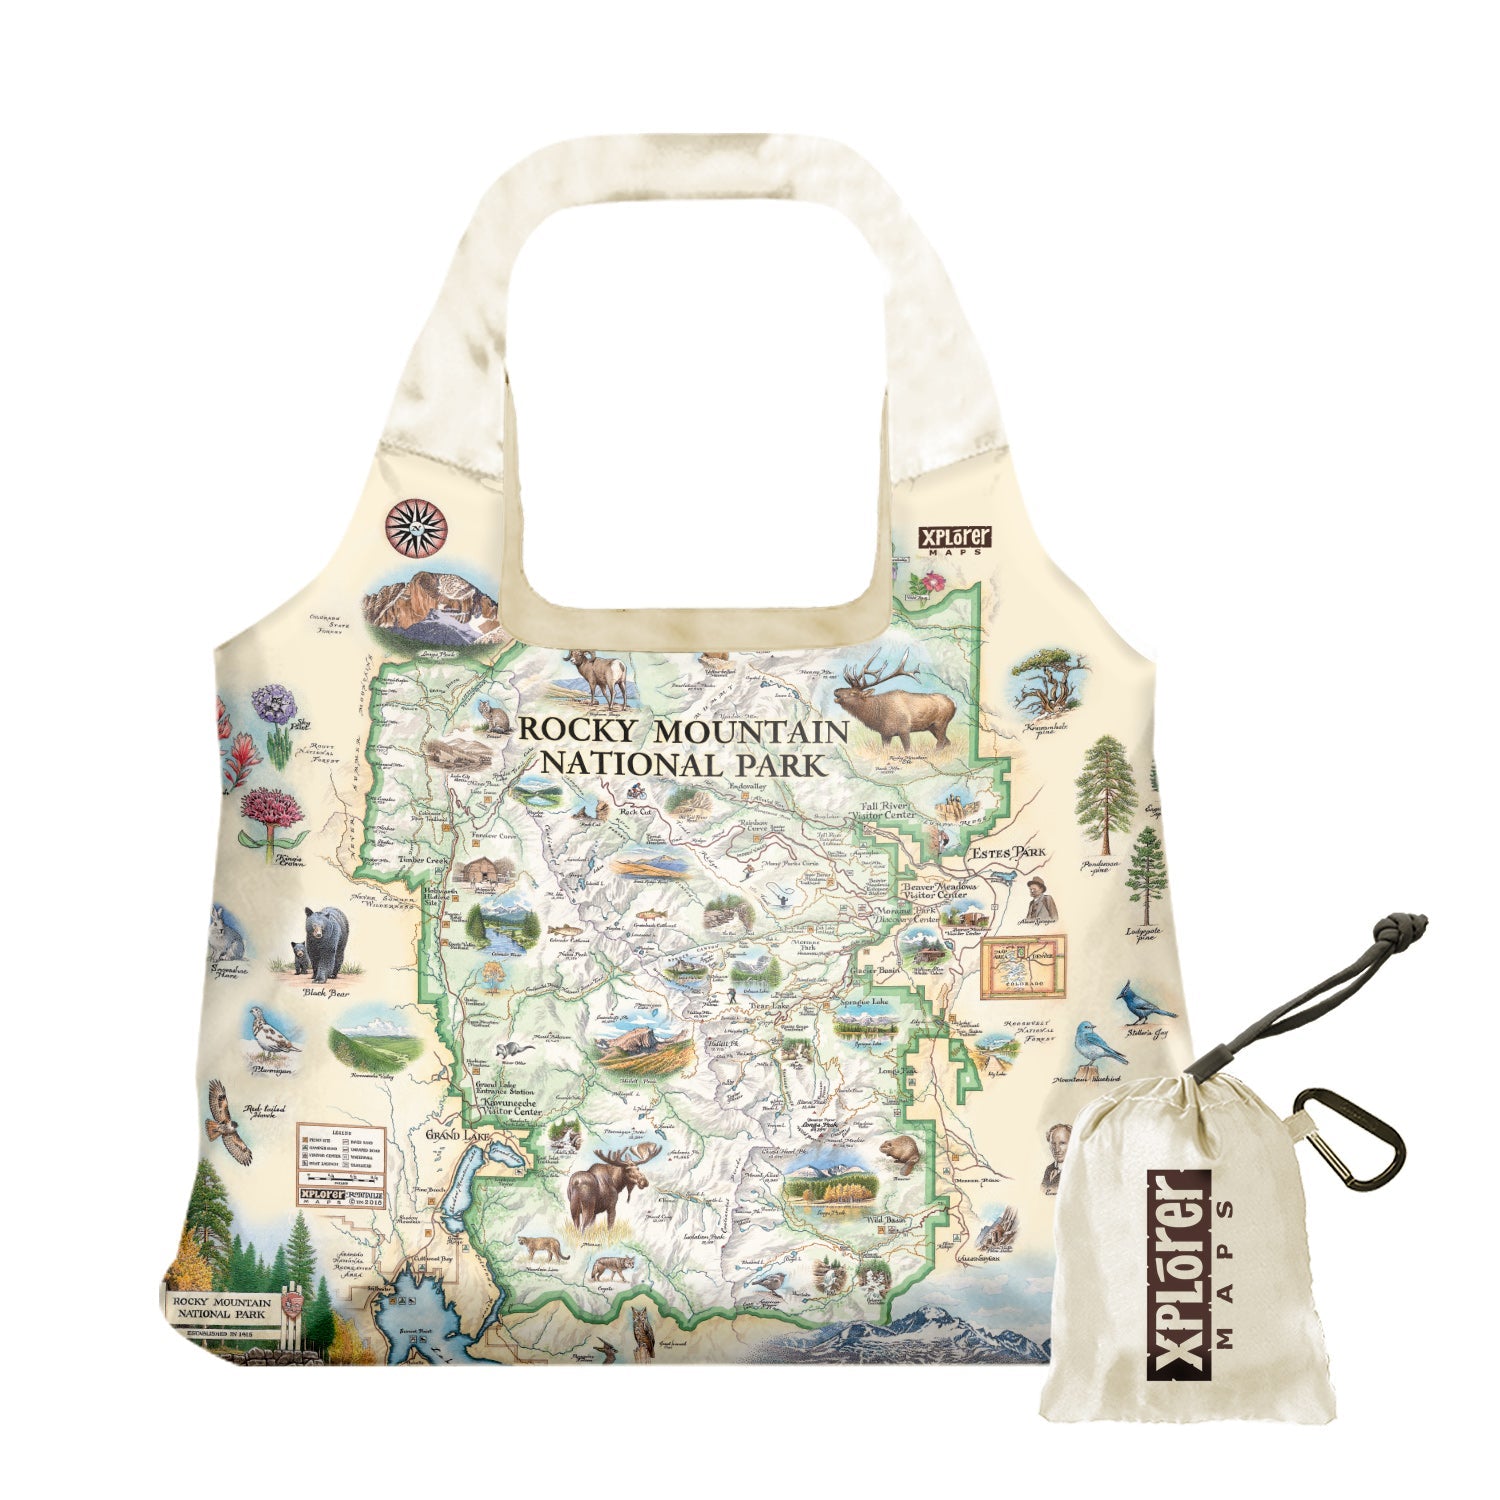 Rocky Mountain National Park Map Pouch Tote Bags by Xplorer Maps. The map features illustrations of places like Trail Ridge Road, Mount Ganby, Estes Park, and the Alpine Visitor Center. Flora and fauna include bobcats, snowshoe hares, Indian paintbrushes, and wild roses.